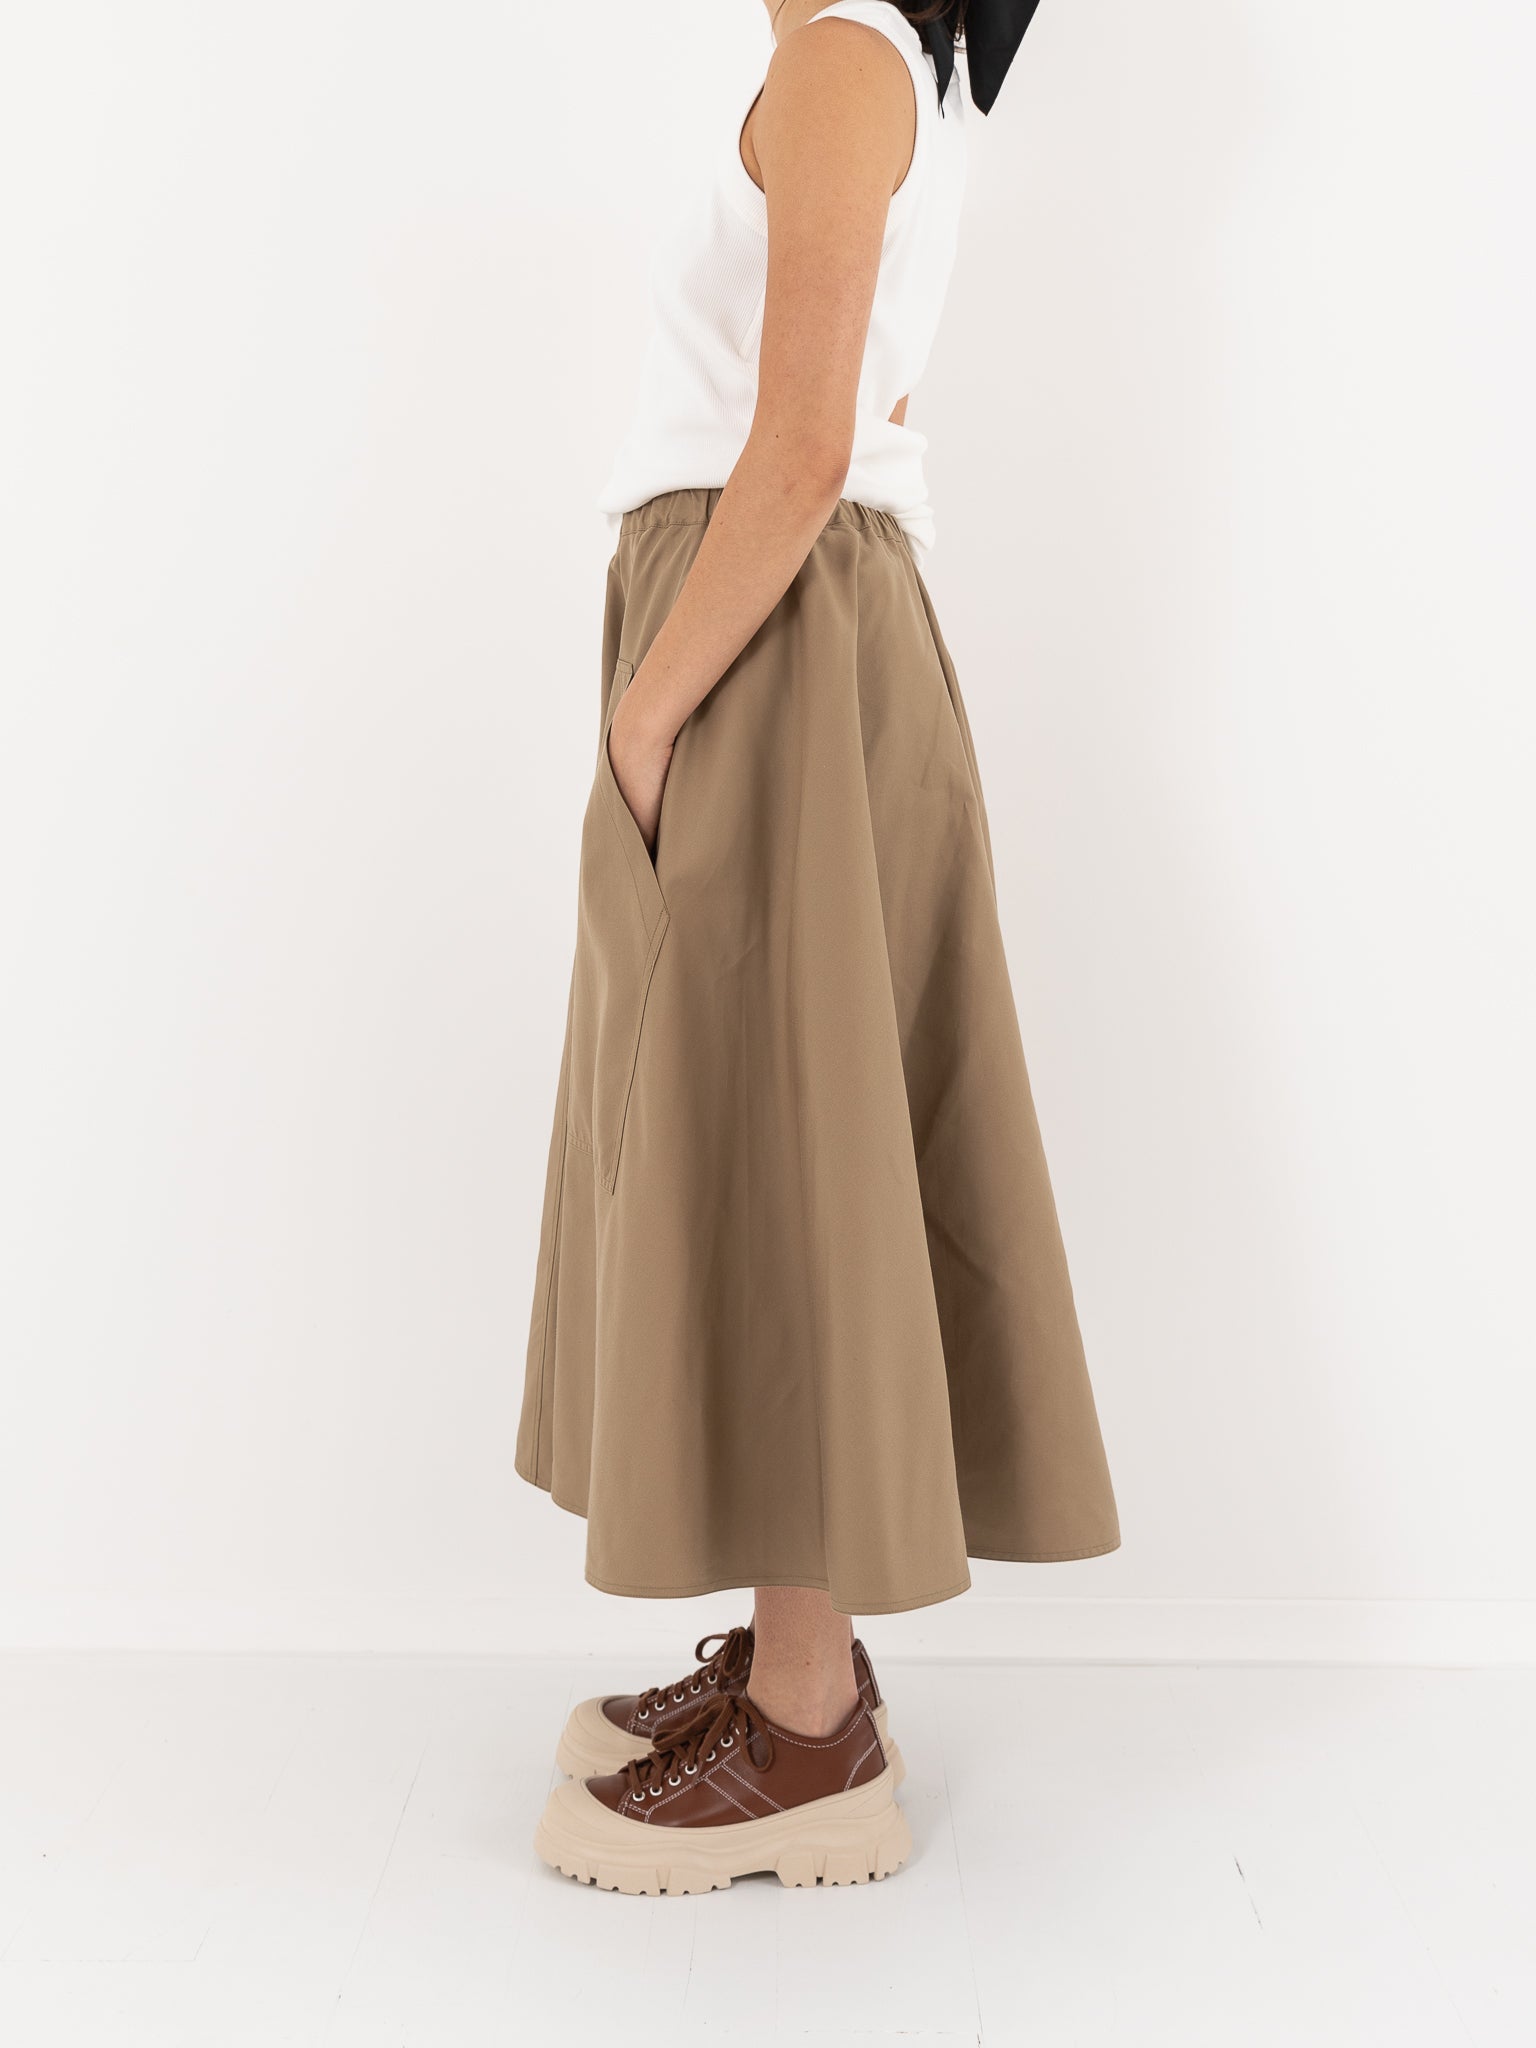 Sofie D'Hoore Scout Skirt, Dune - Worthwhile, Inc.